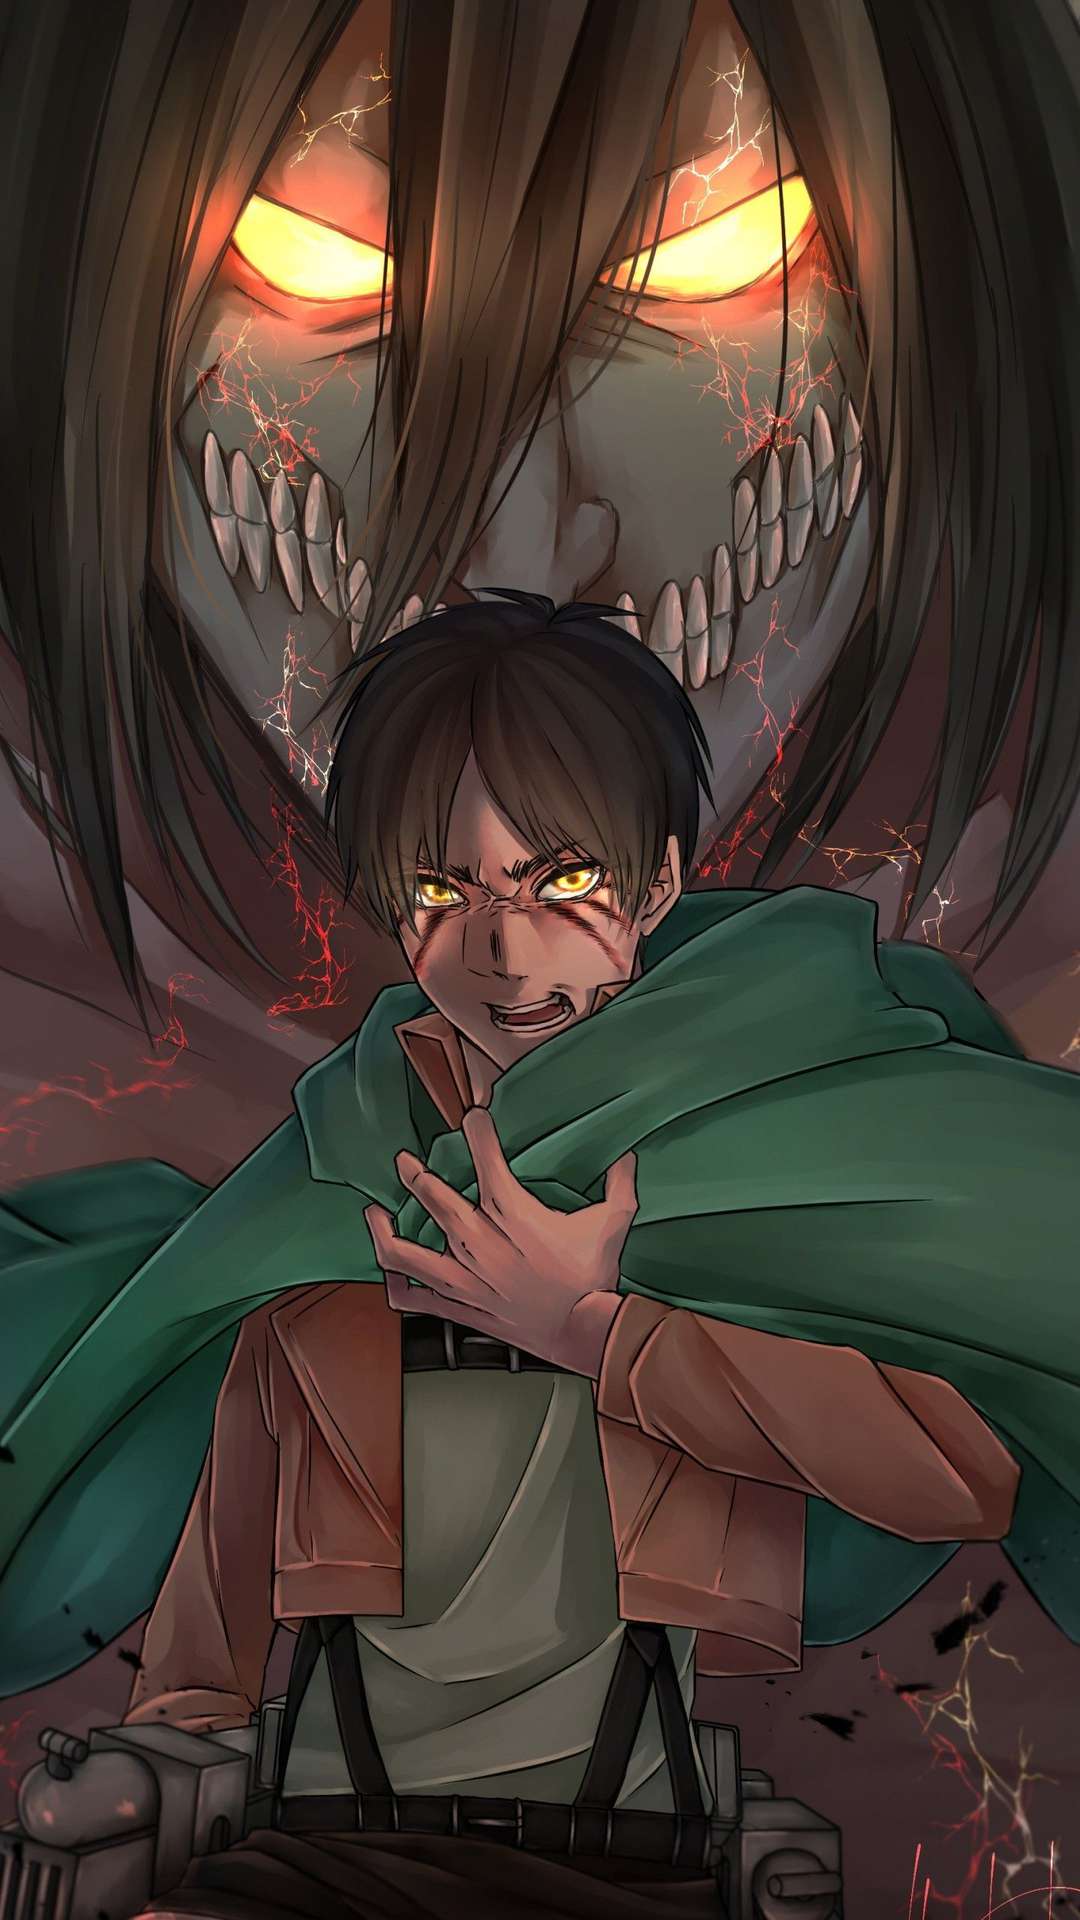 Download Eren Yeager wallpaper by Ballzartz  e3  Free on ZEDGE now  Browse millions of popular anime Wallpapers and Ringto  Anime Anime  butterfly Ajin anime